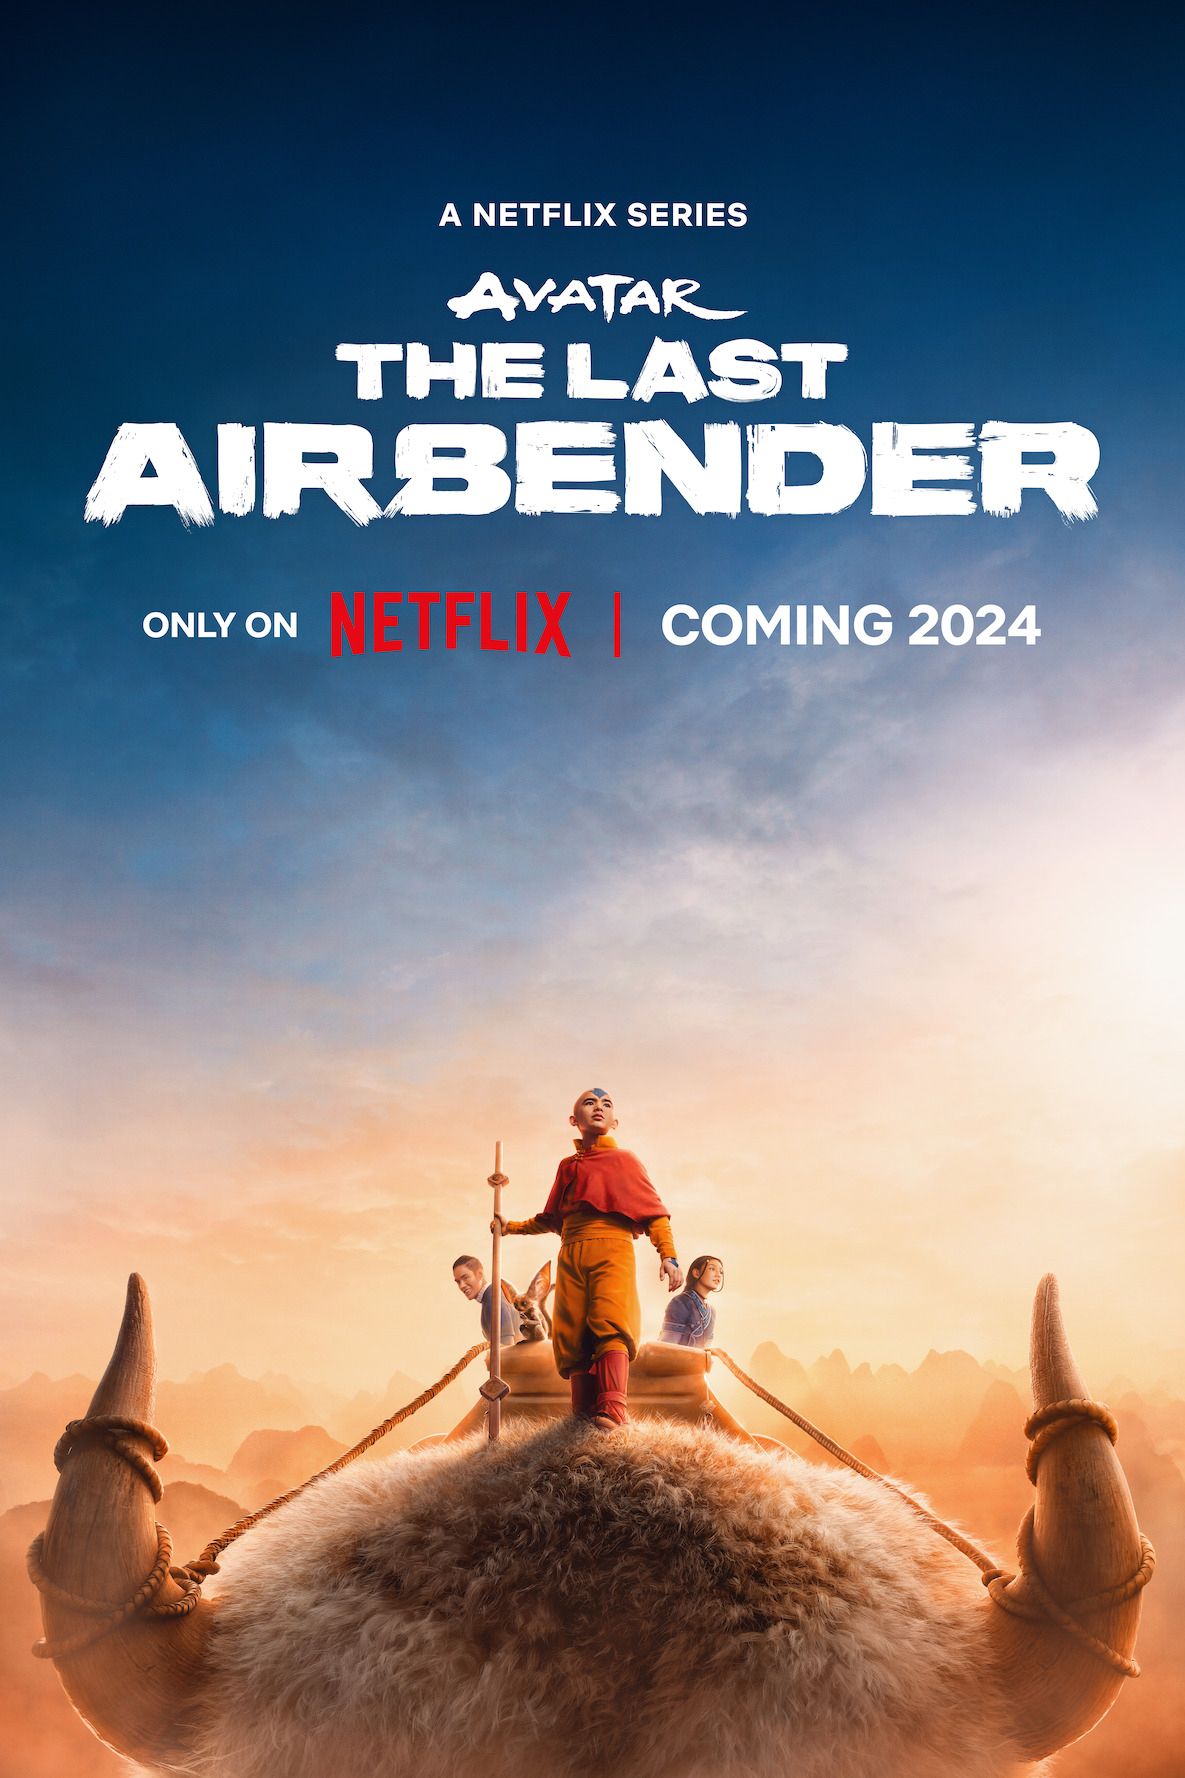 Avatar The Last Airbender Netflix Live Action Series Poster